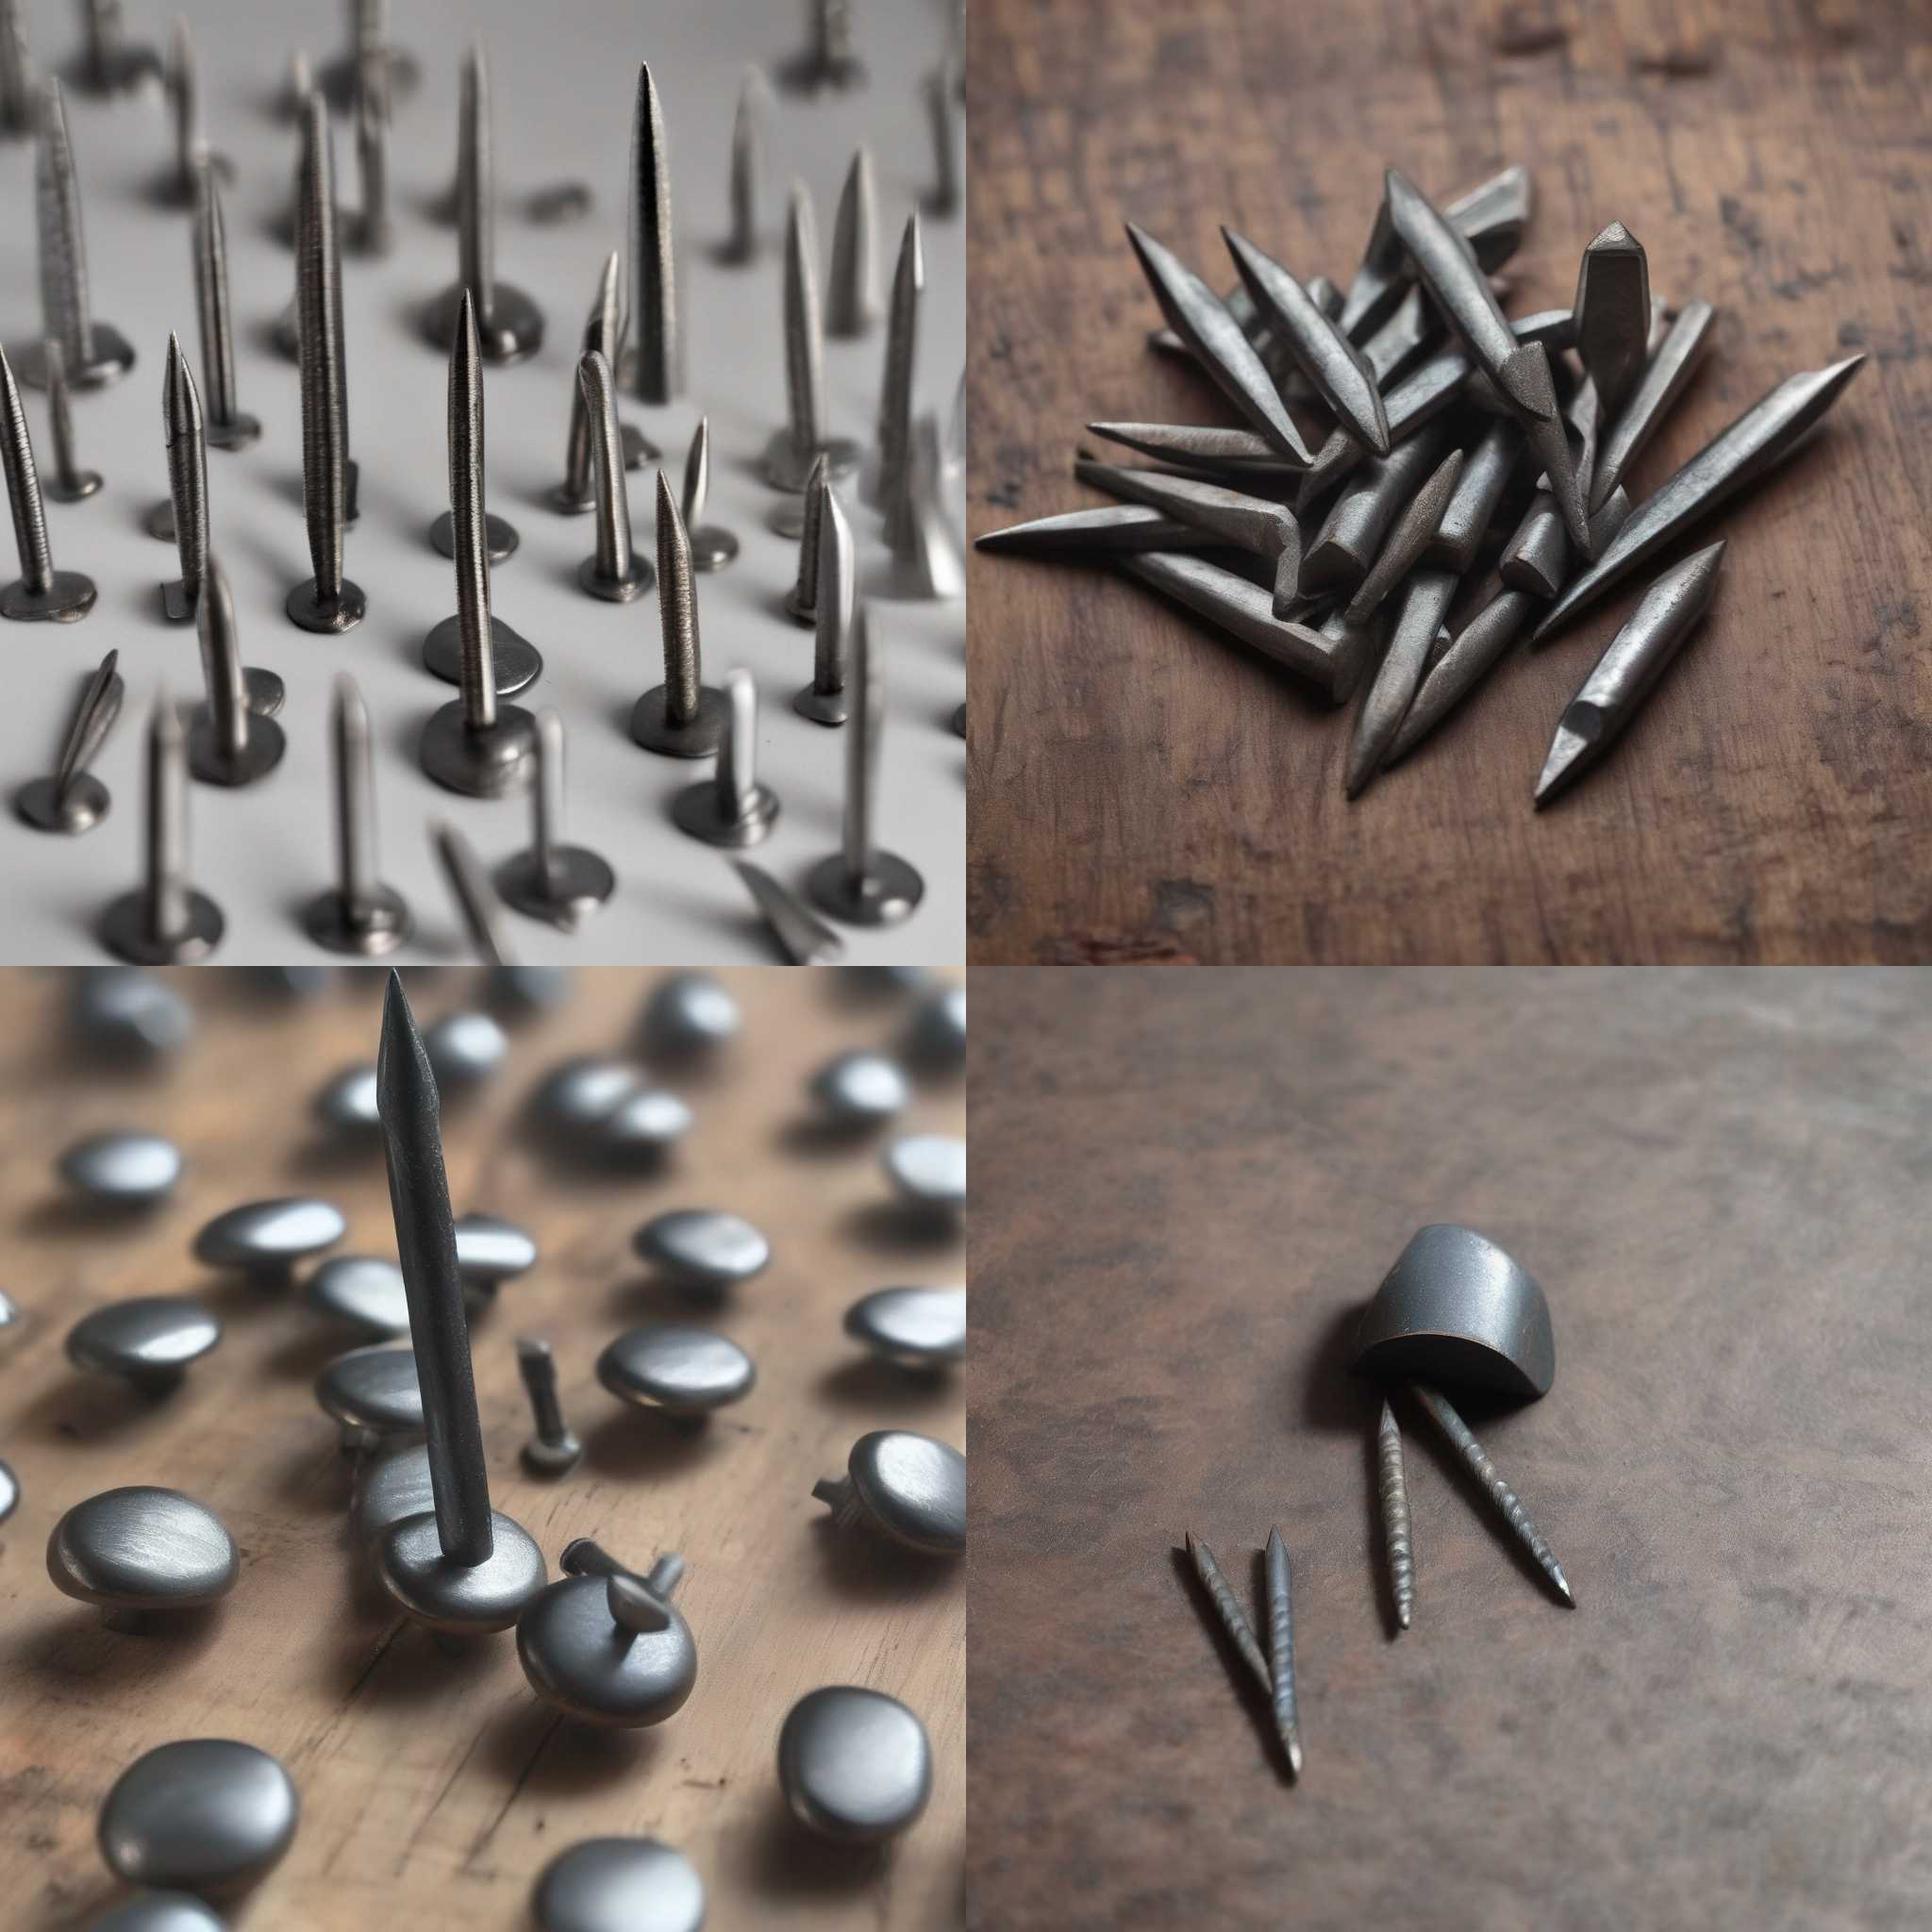 Iron nails and a magnet